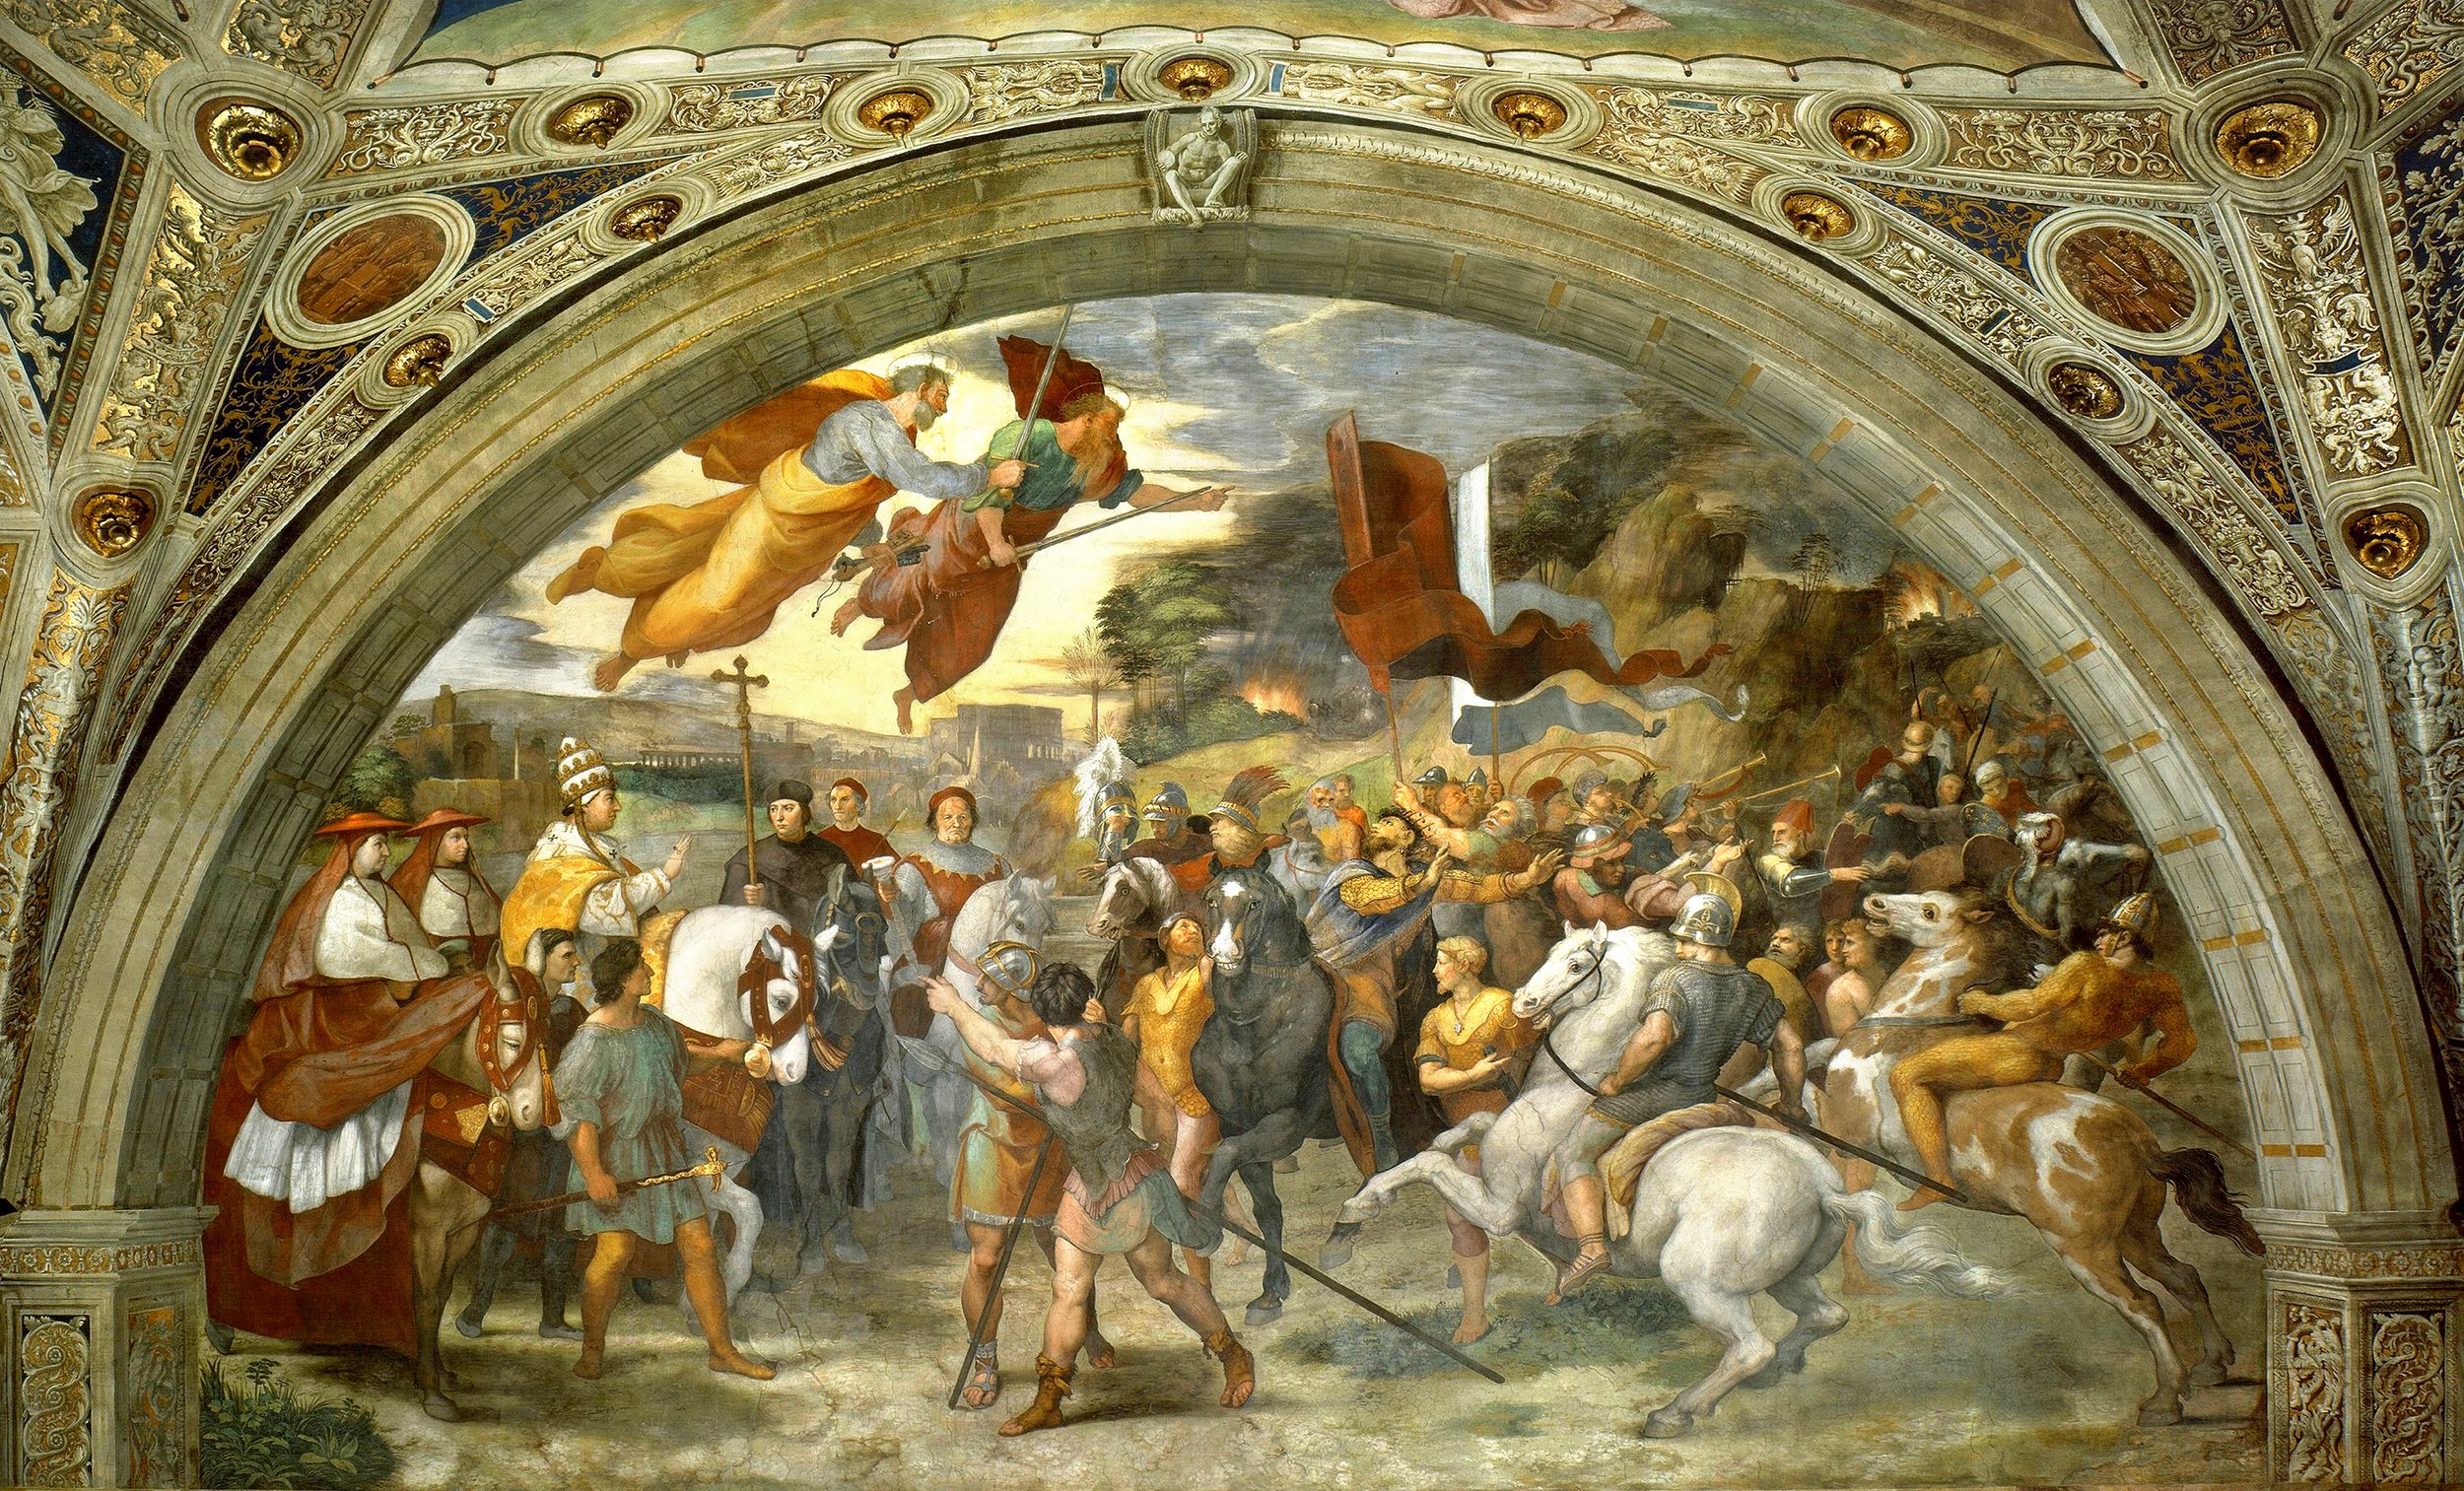 Pope Leo I meets with Attlia the Hun possibly somewhere near Mantua in this Vatican fresco by Raphael. That the Pope was successful in persuading the Huns to spare Italy in this 452 AD meeting may have been because of the logistical difficulties involved in invading the Italian peninsula. Later, Rome would have to pay tribute to forestall invasion.
